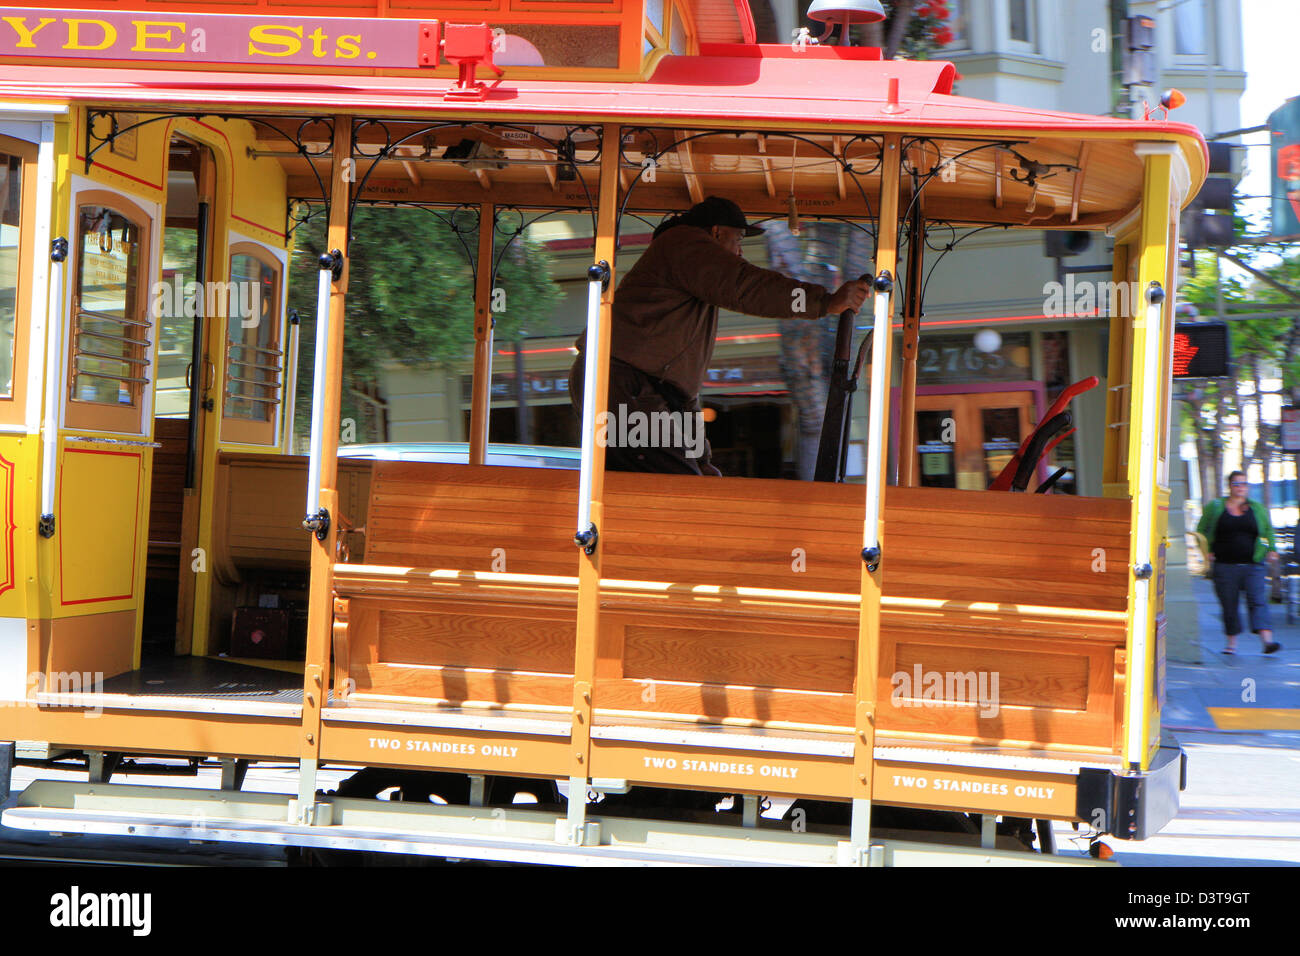 Cable car on Powell / market turnaround, San Francisco, California, United States of America Stock Photo